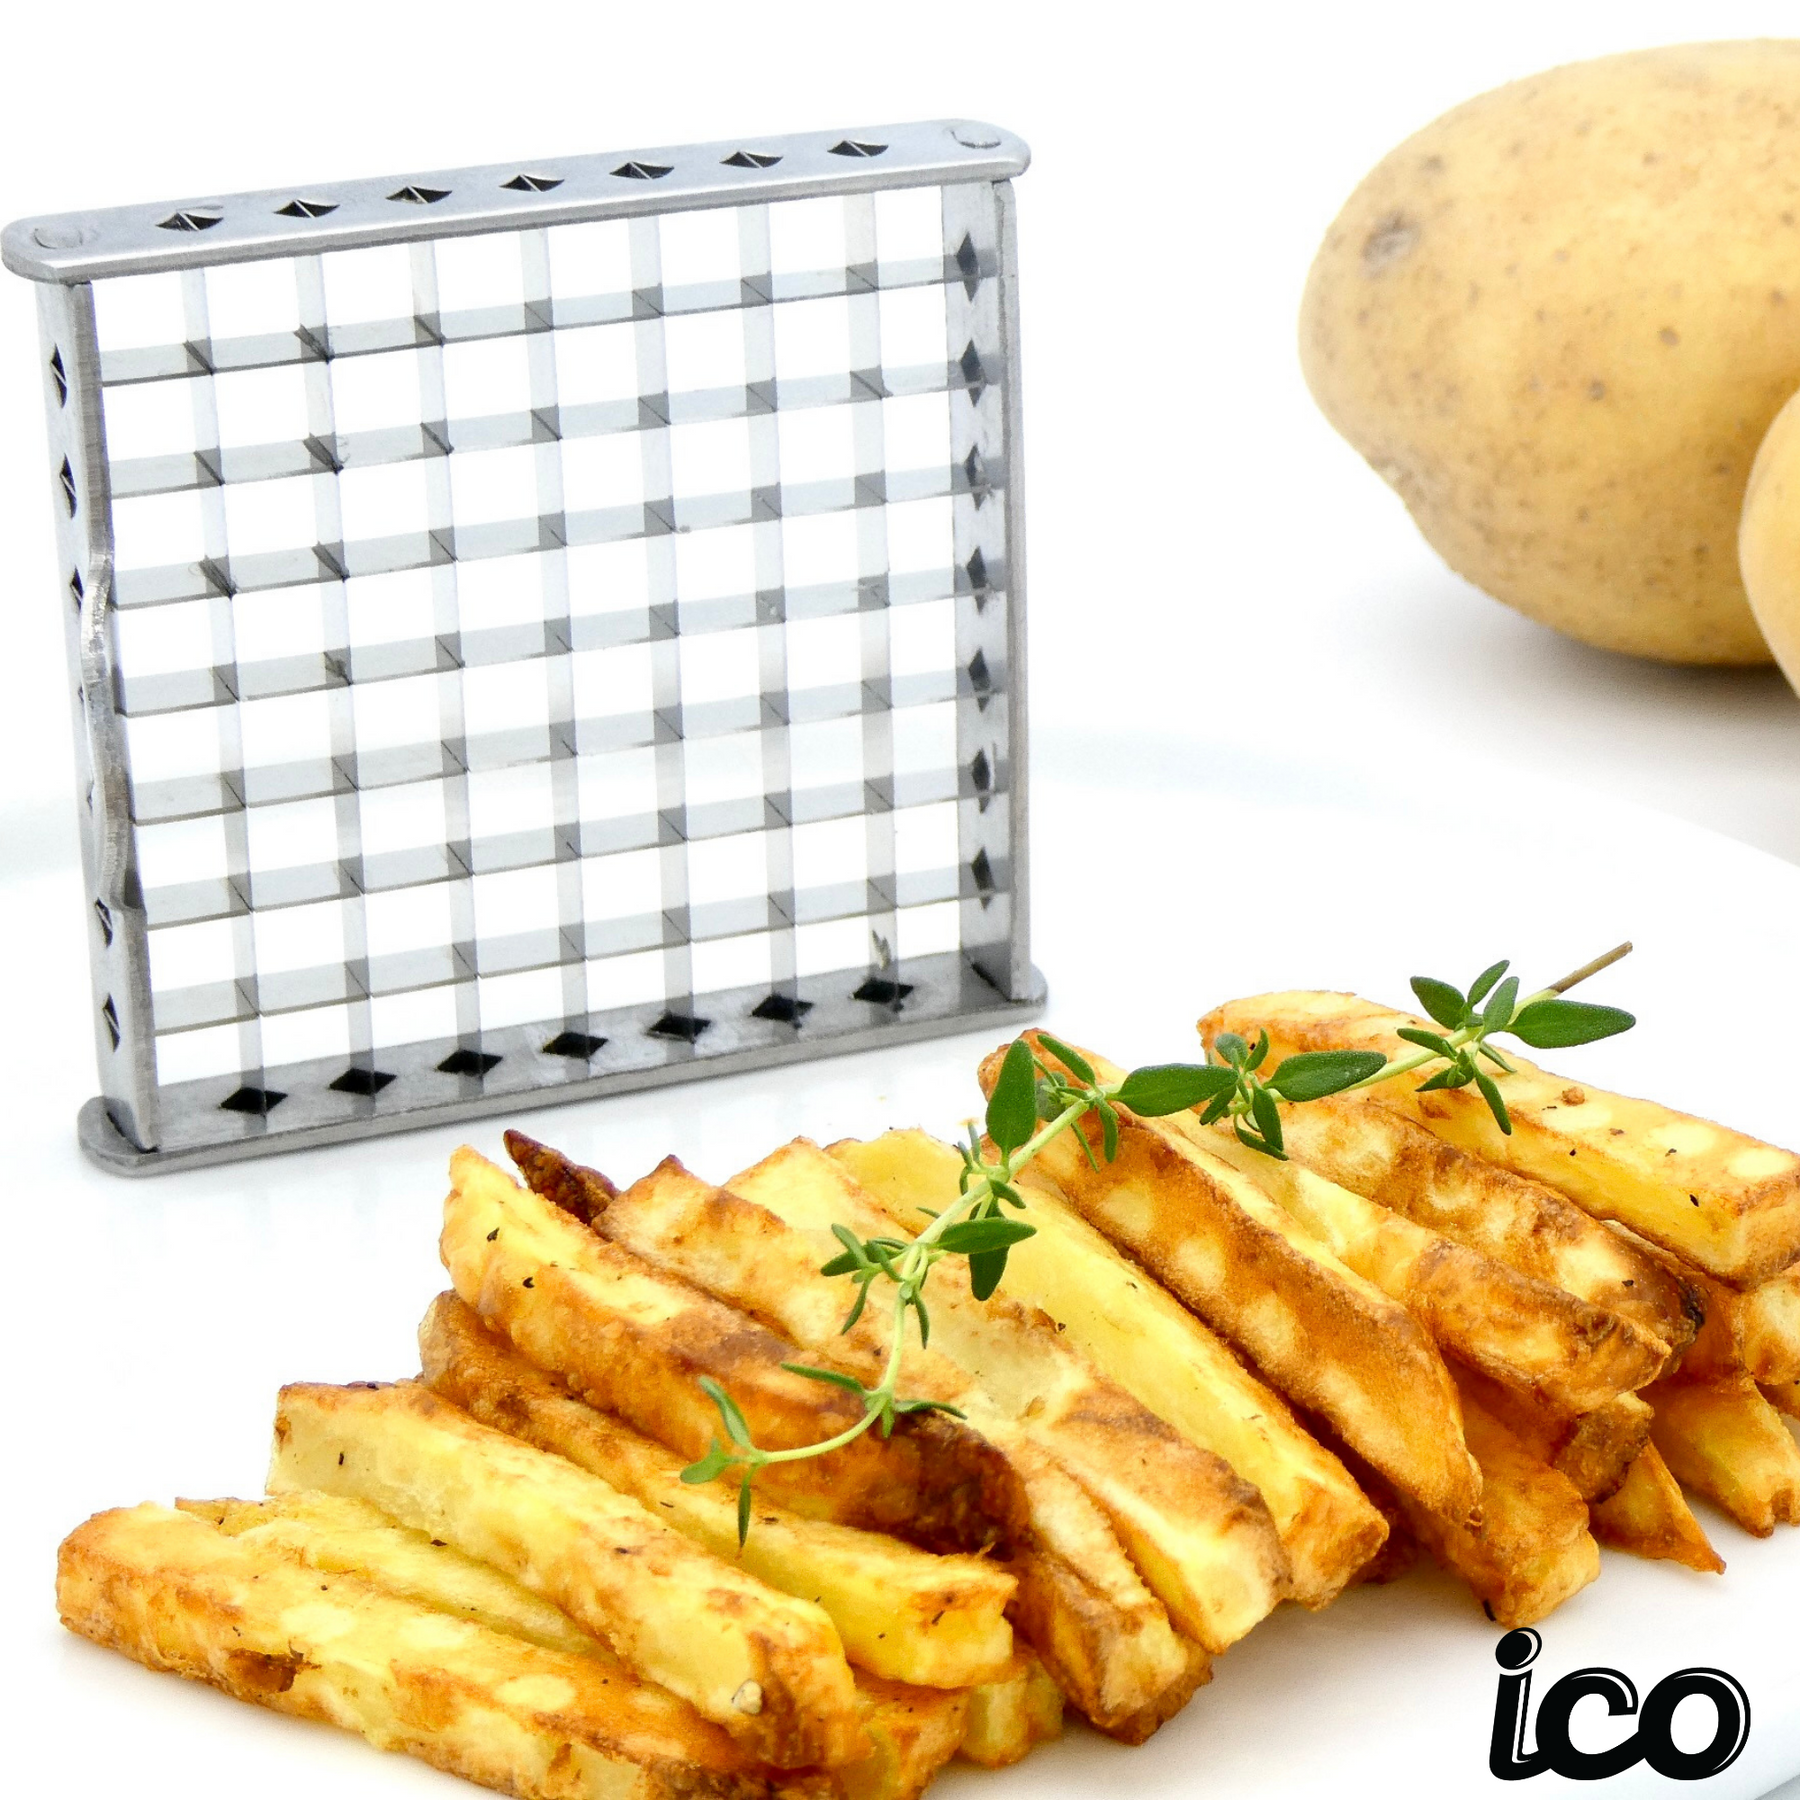 ICO Replacement Fry Cutter Small Blade and Pusher